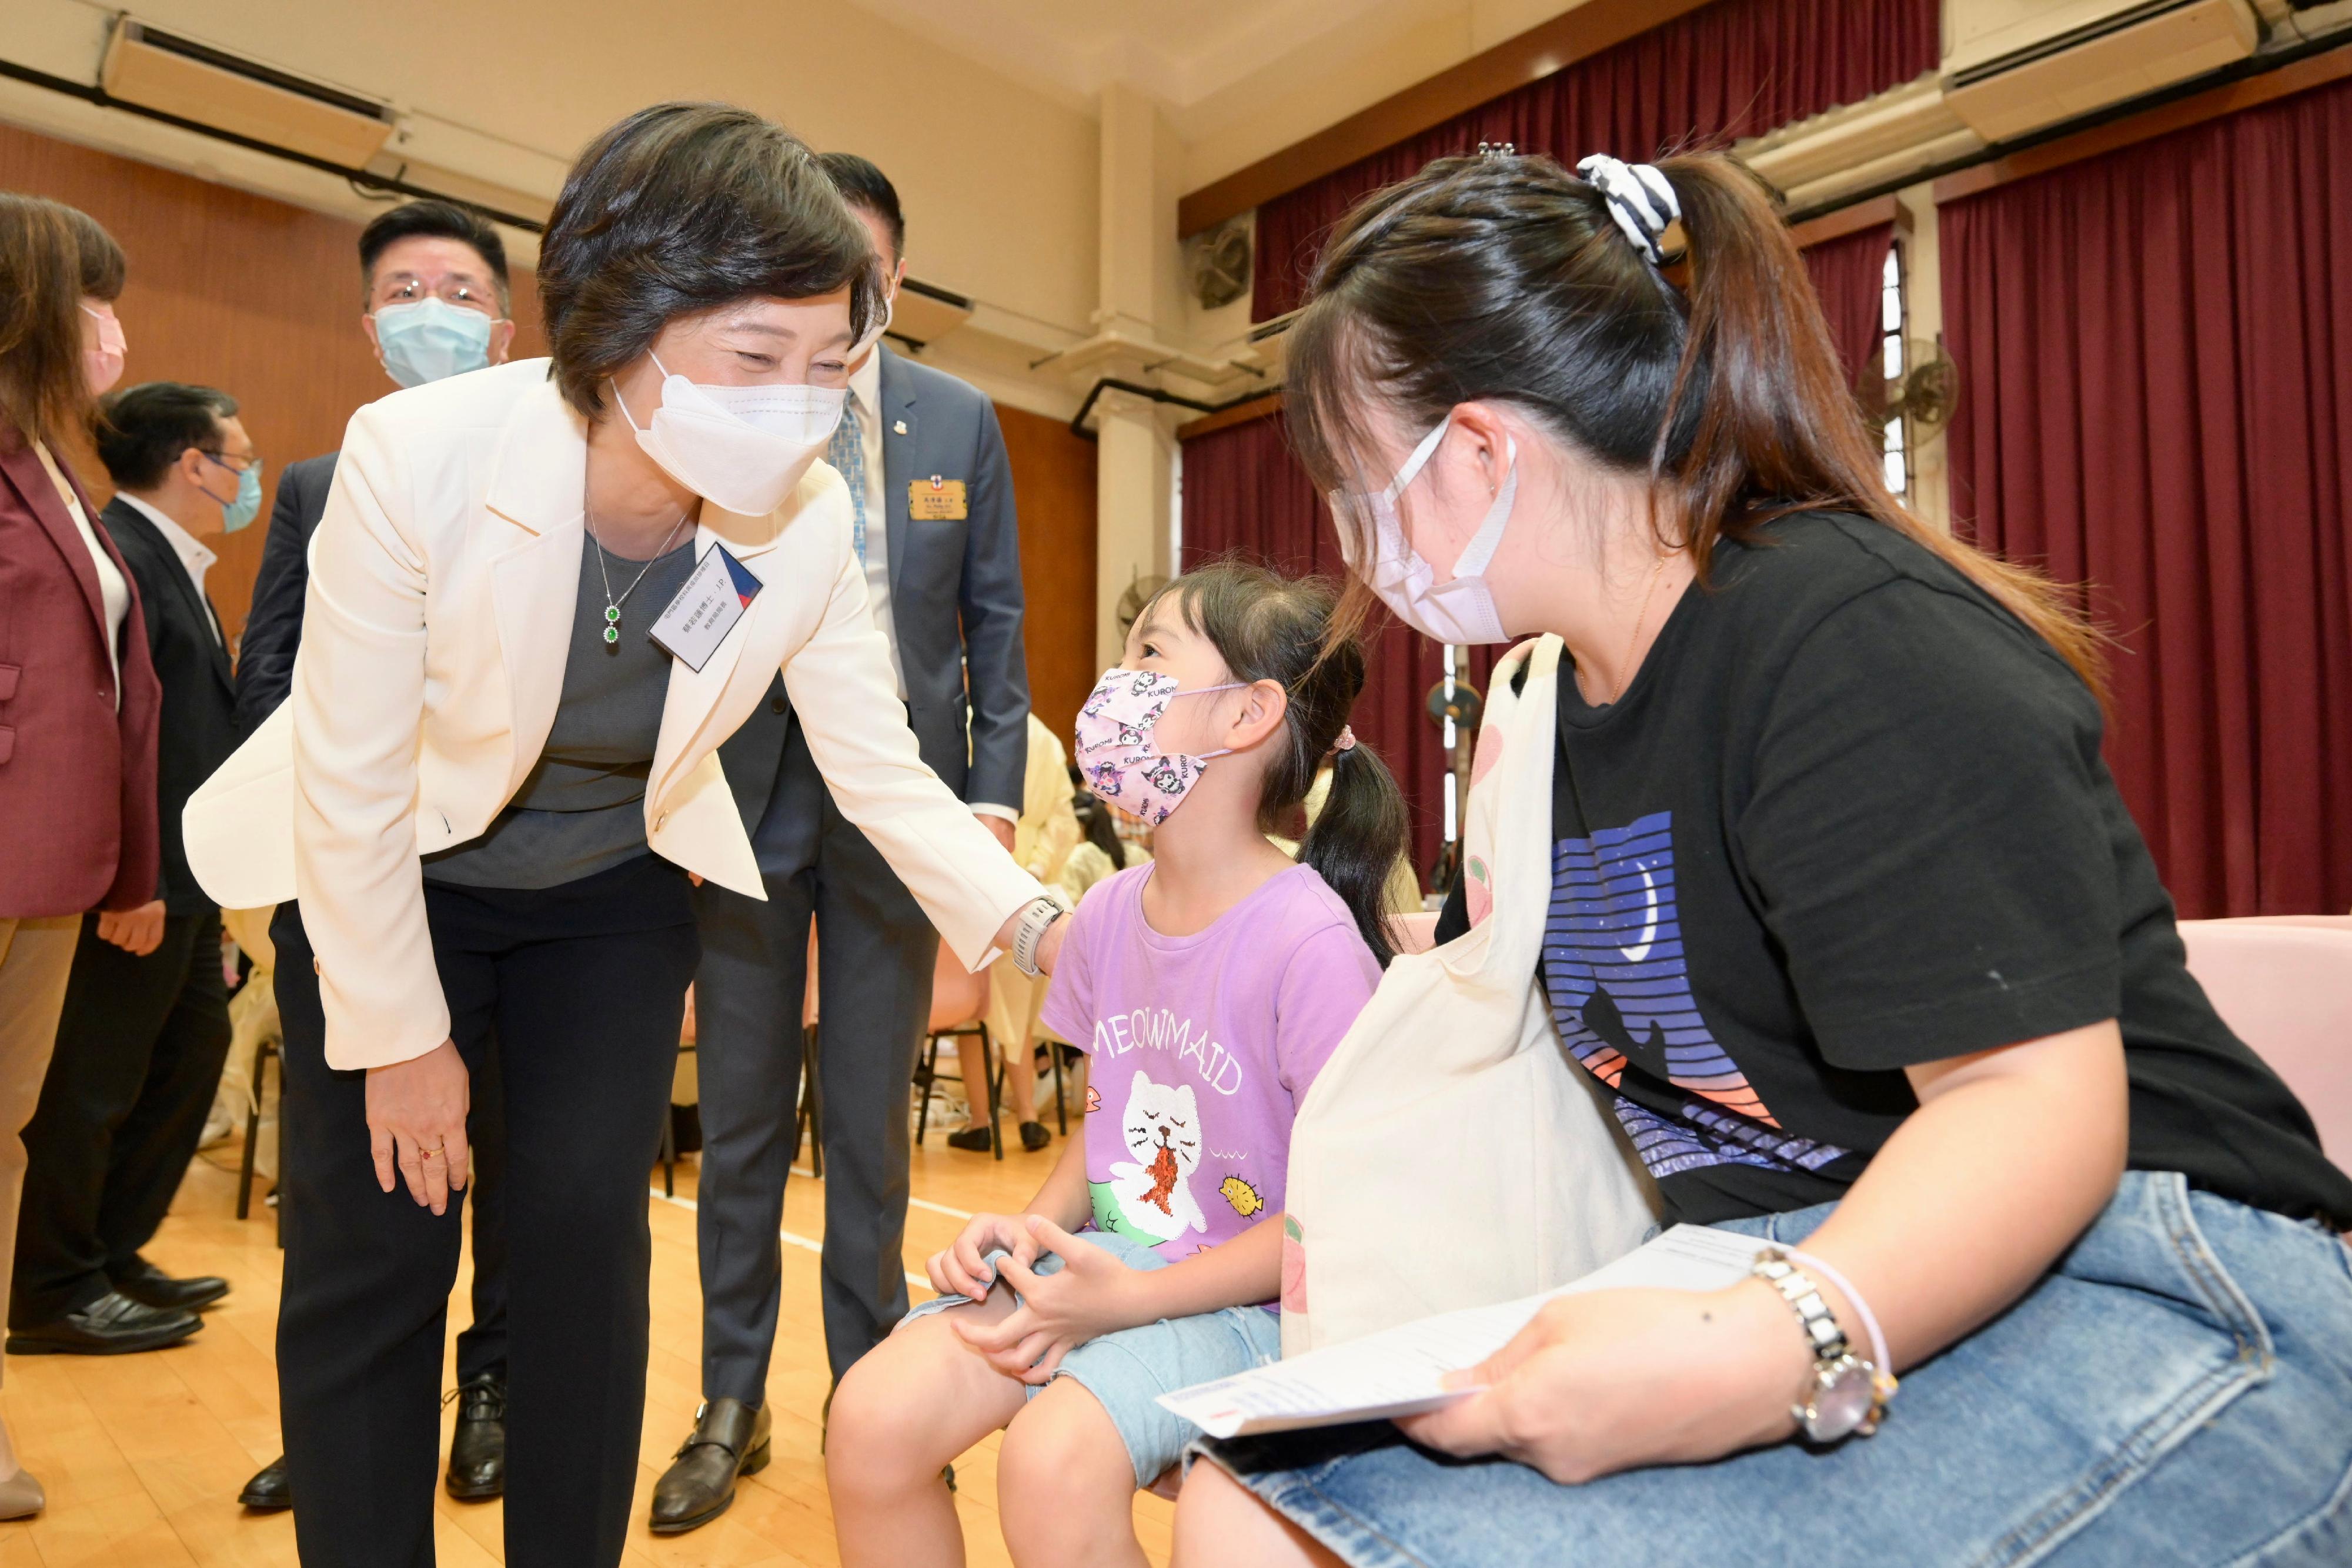 The Secretary for Education, Dr Choi Yuk-lin, visited TWGHs Yau Tze Tin Memorial College today (August 5) to attend the "School Vaccination Day" activity, which was organised by the Education Bureau and a school sponsoring body for the first time. Photo shows Dr Choi (first left) talking to a student receiving a COVID-19 vaccination.
